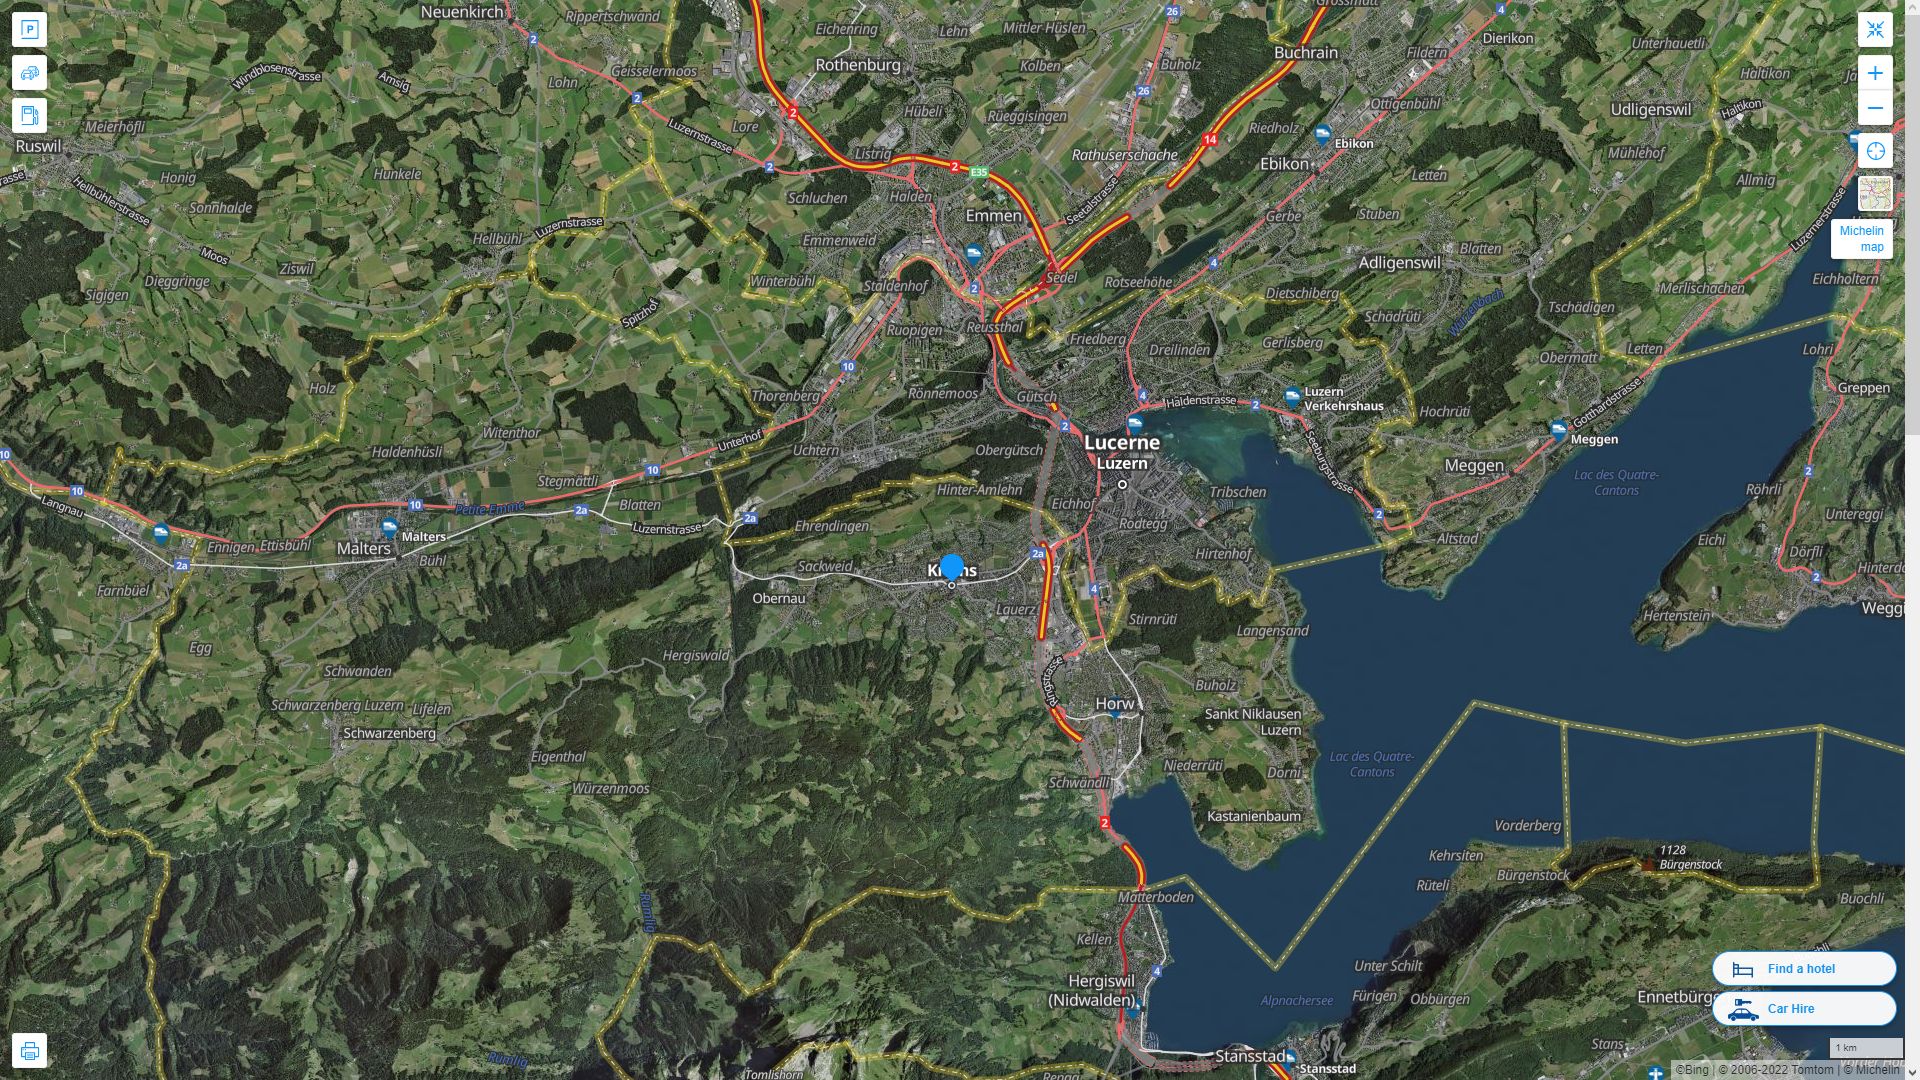 Kriens Highway and Road Map with Satellite View